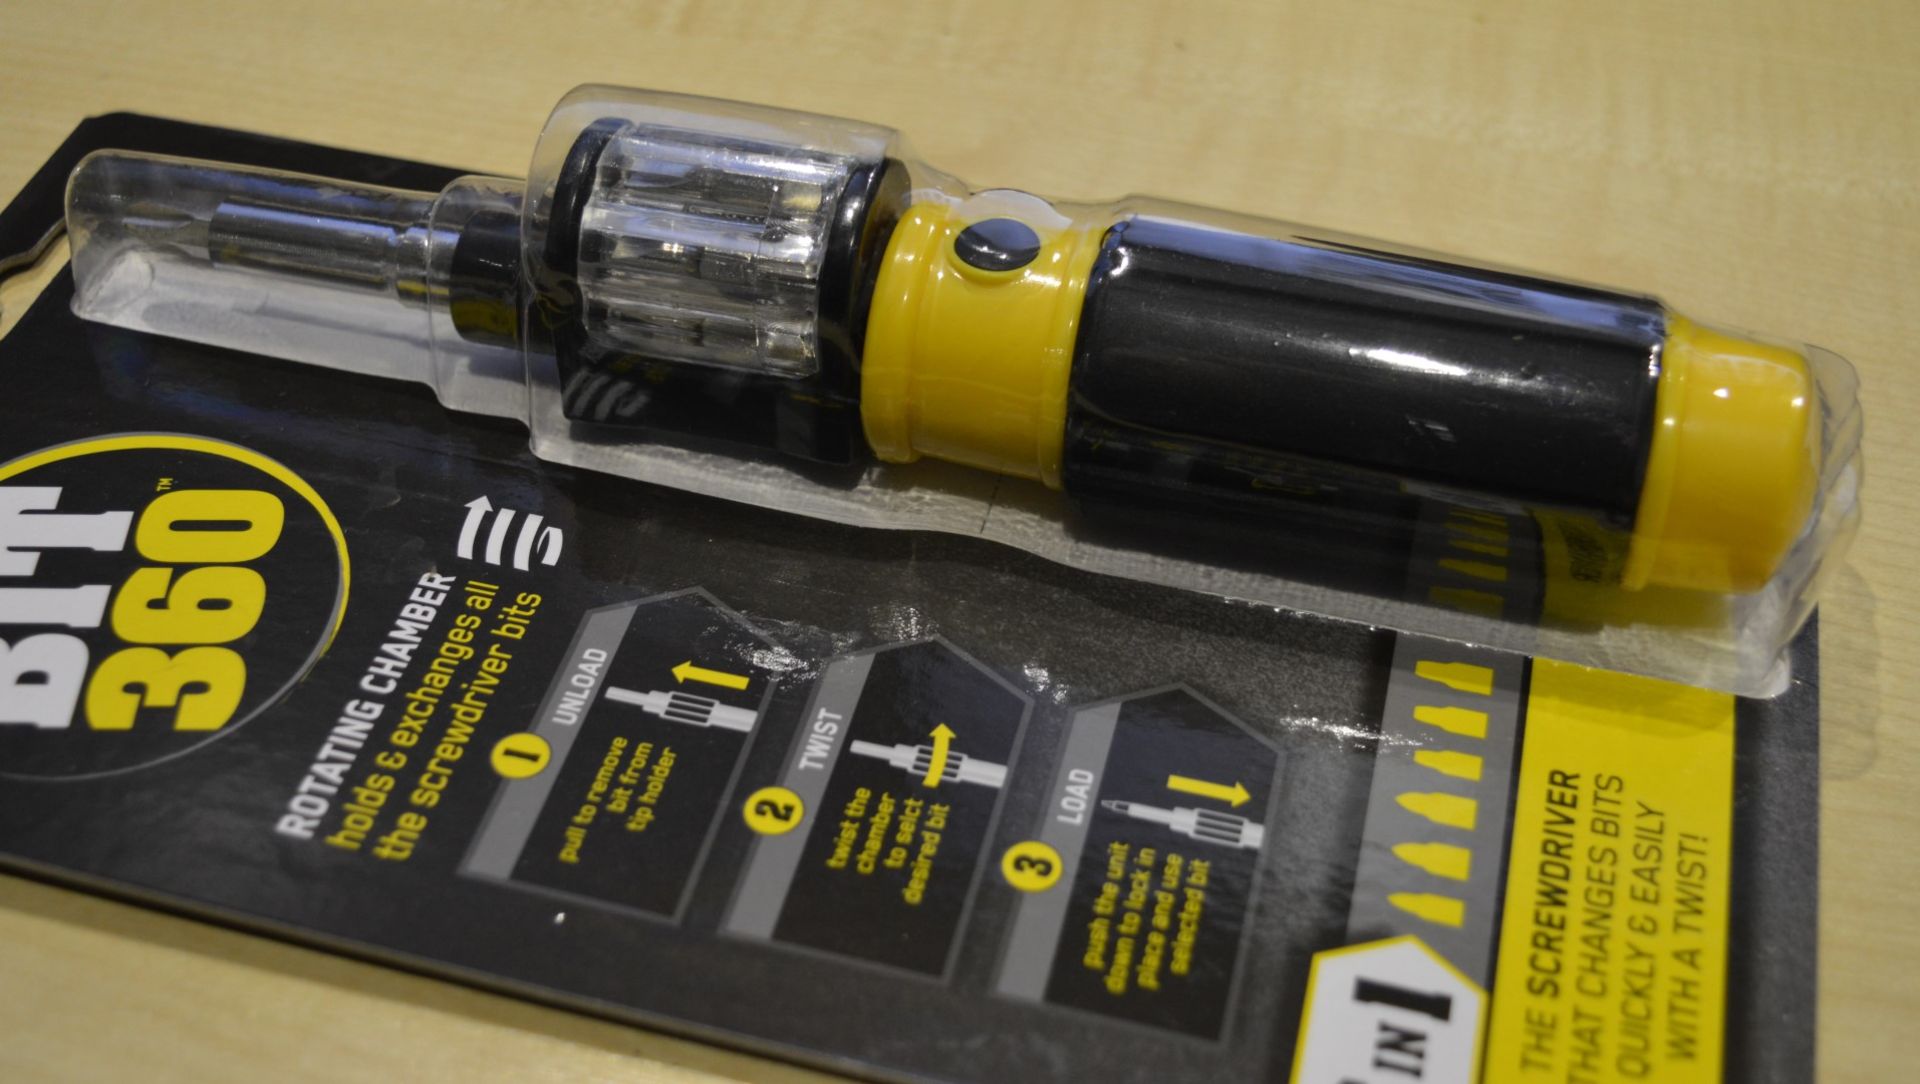 5 x Bit 360 All-in-One Screwdriver and Bit Set - The Screwdrive That Changes Bits Quickly and Easily - Image 2 of 7